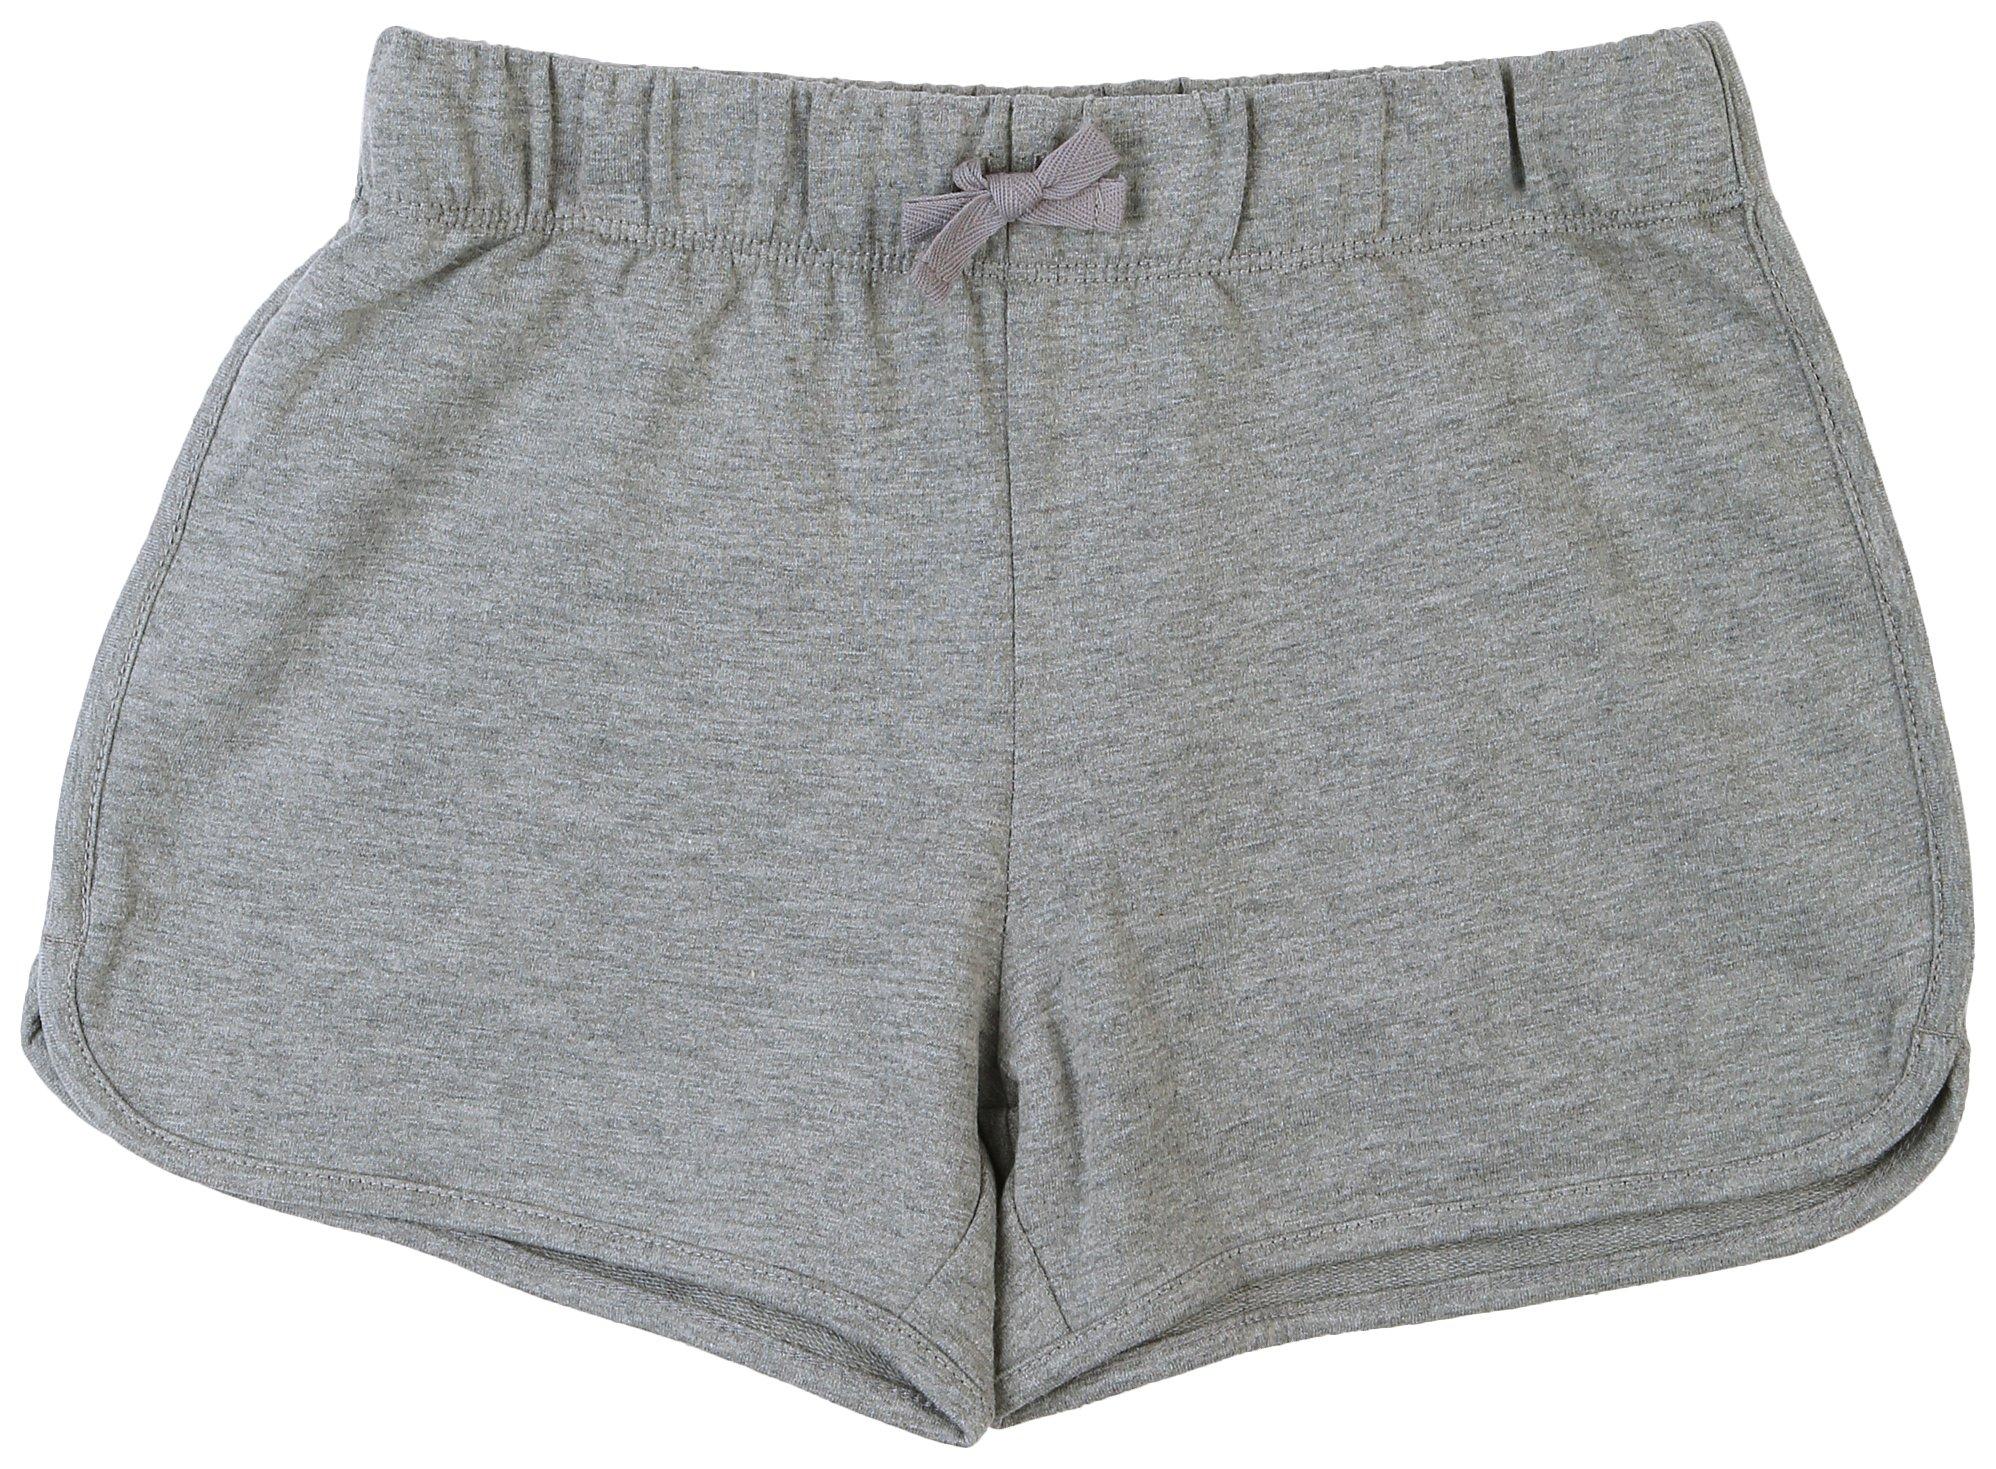 Little Girls Solid Leisure Shorts